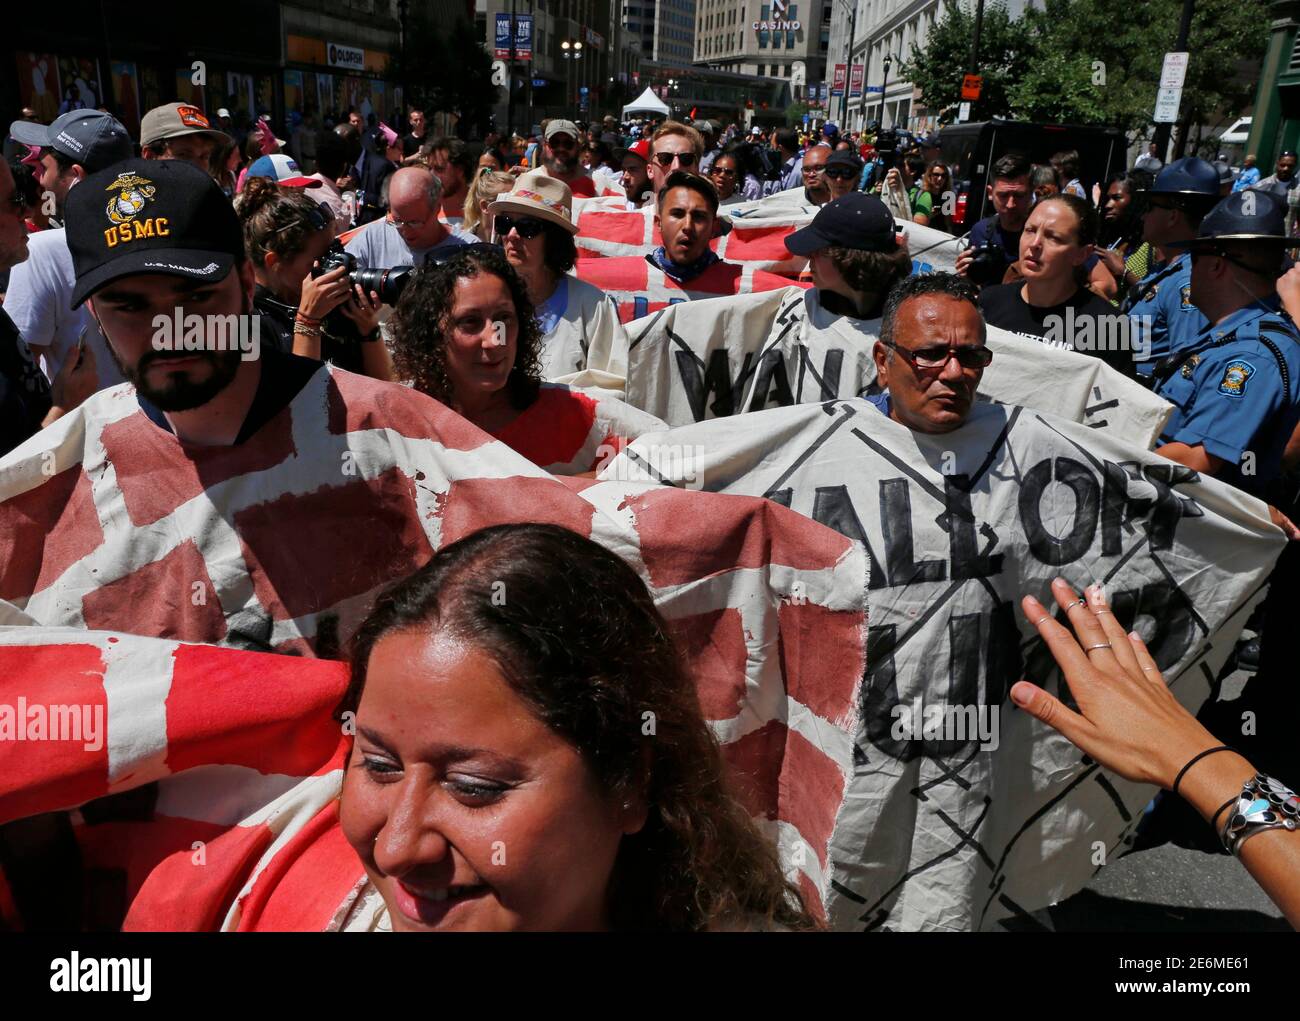 Demonstrators protesting against the immigration policies of Republican U.S. presidential nominee Donald Trump march outside the arena hosting the Republican National Convention in Cleveland, Ohio, U.S. July 19, 2016.         REUTERS/Lucas Jackson  TPX IMAGES OF THE DAY Stock Photo